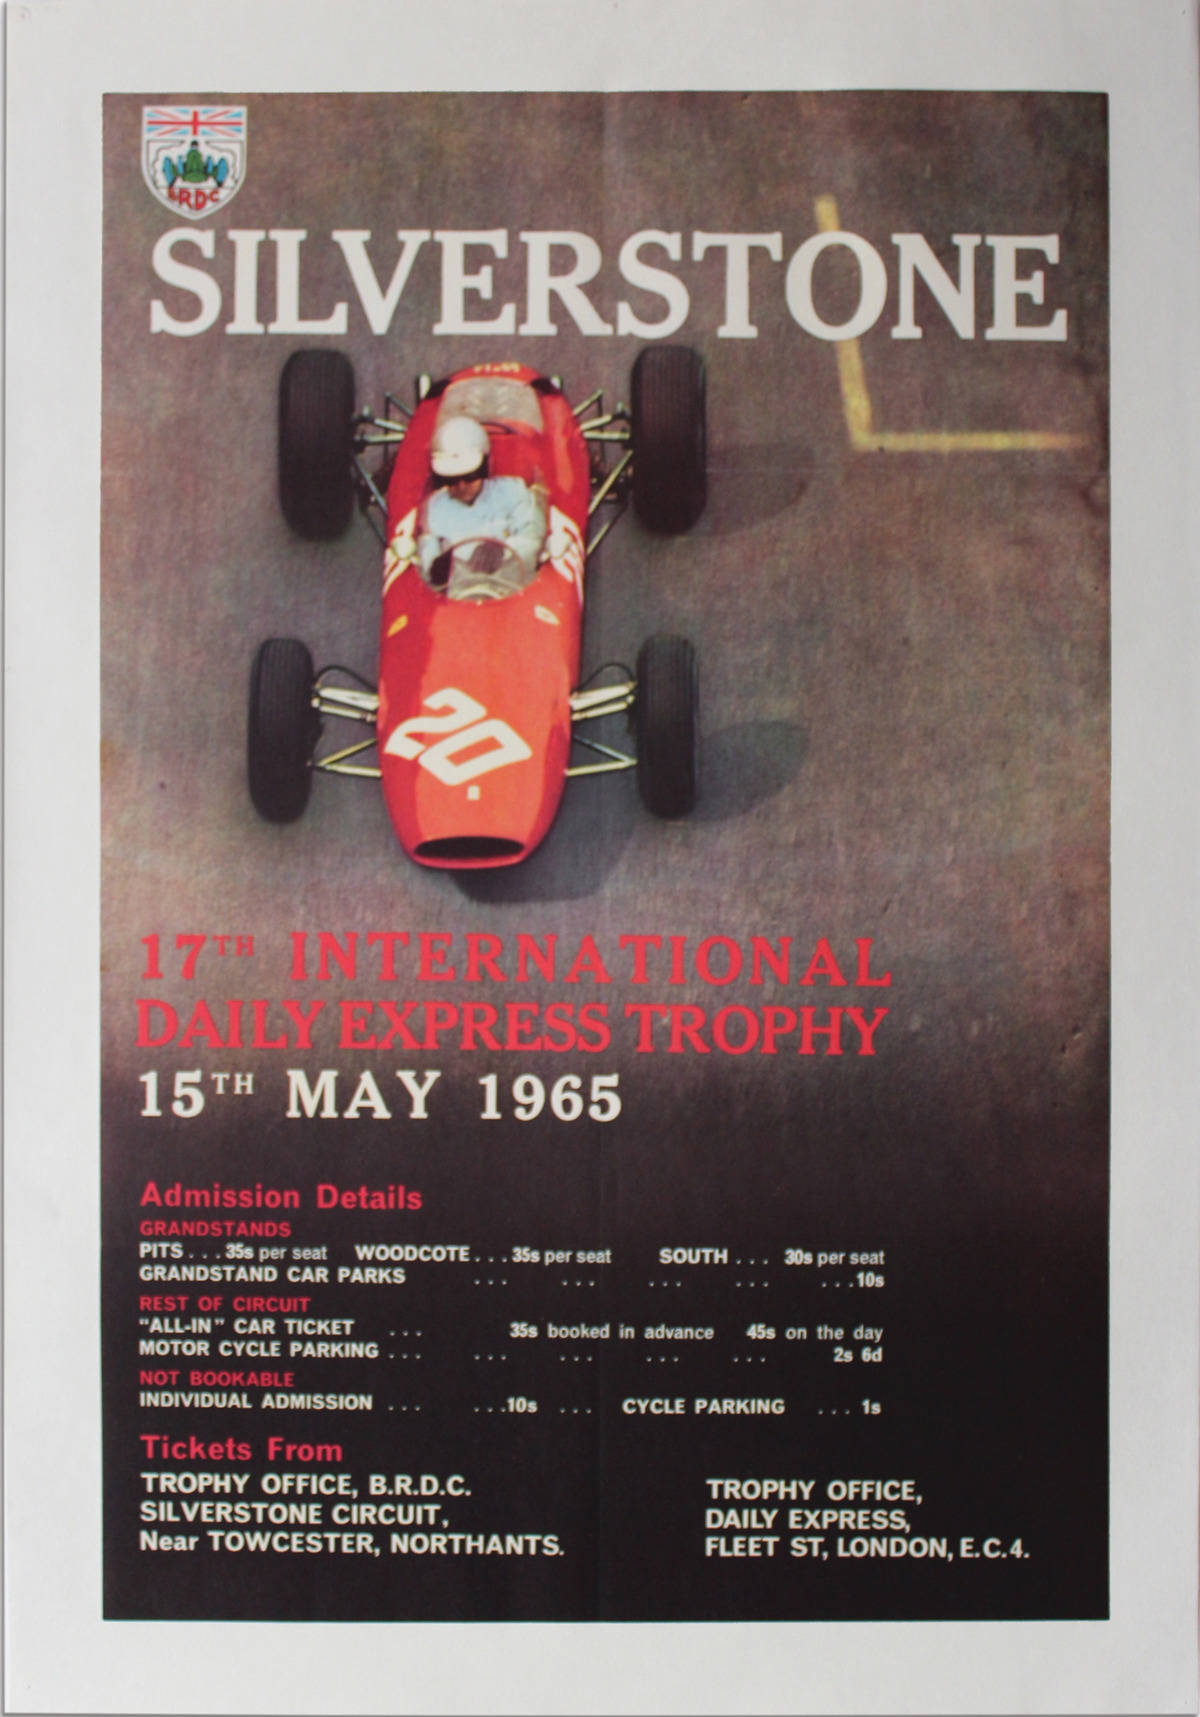 Silverstone 17th International Daily Express Trophy 15th May 1965 Poster offered in RM Sotheby's The Art of Competition 2020